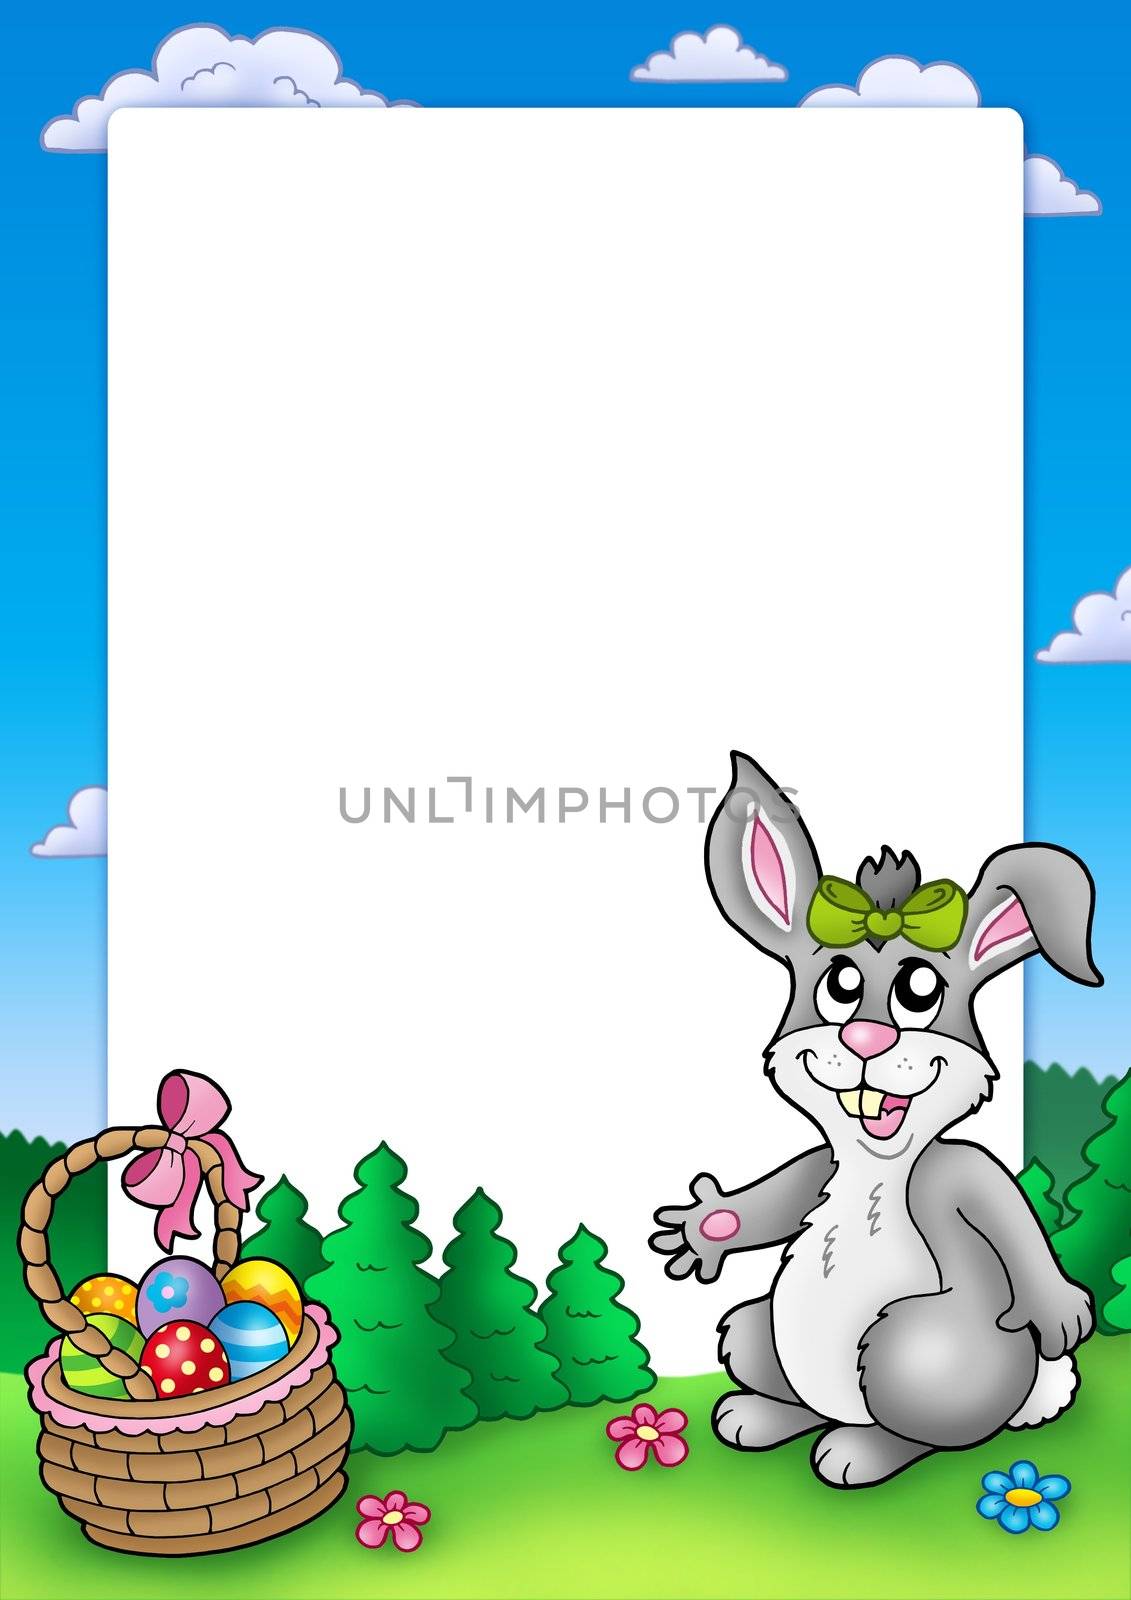 Easter frame with cute bunny - color illustration.